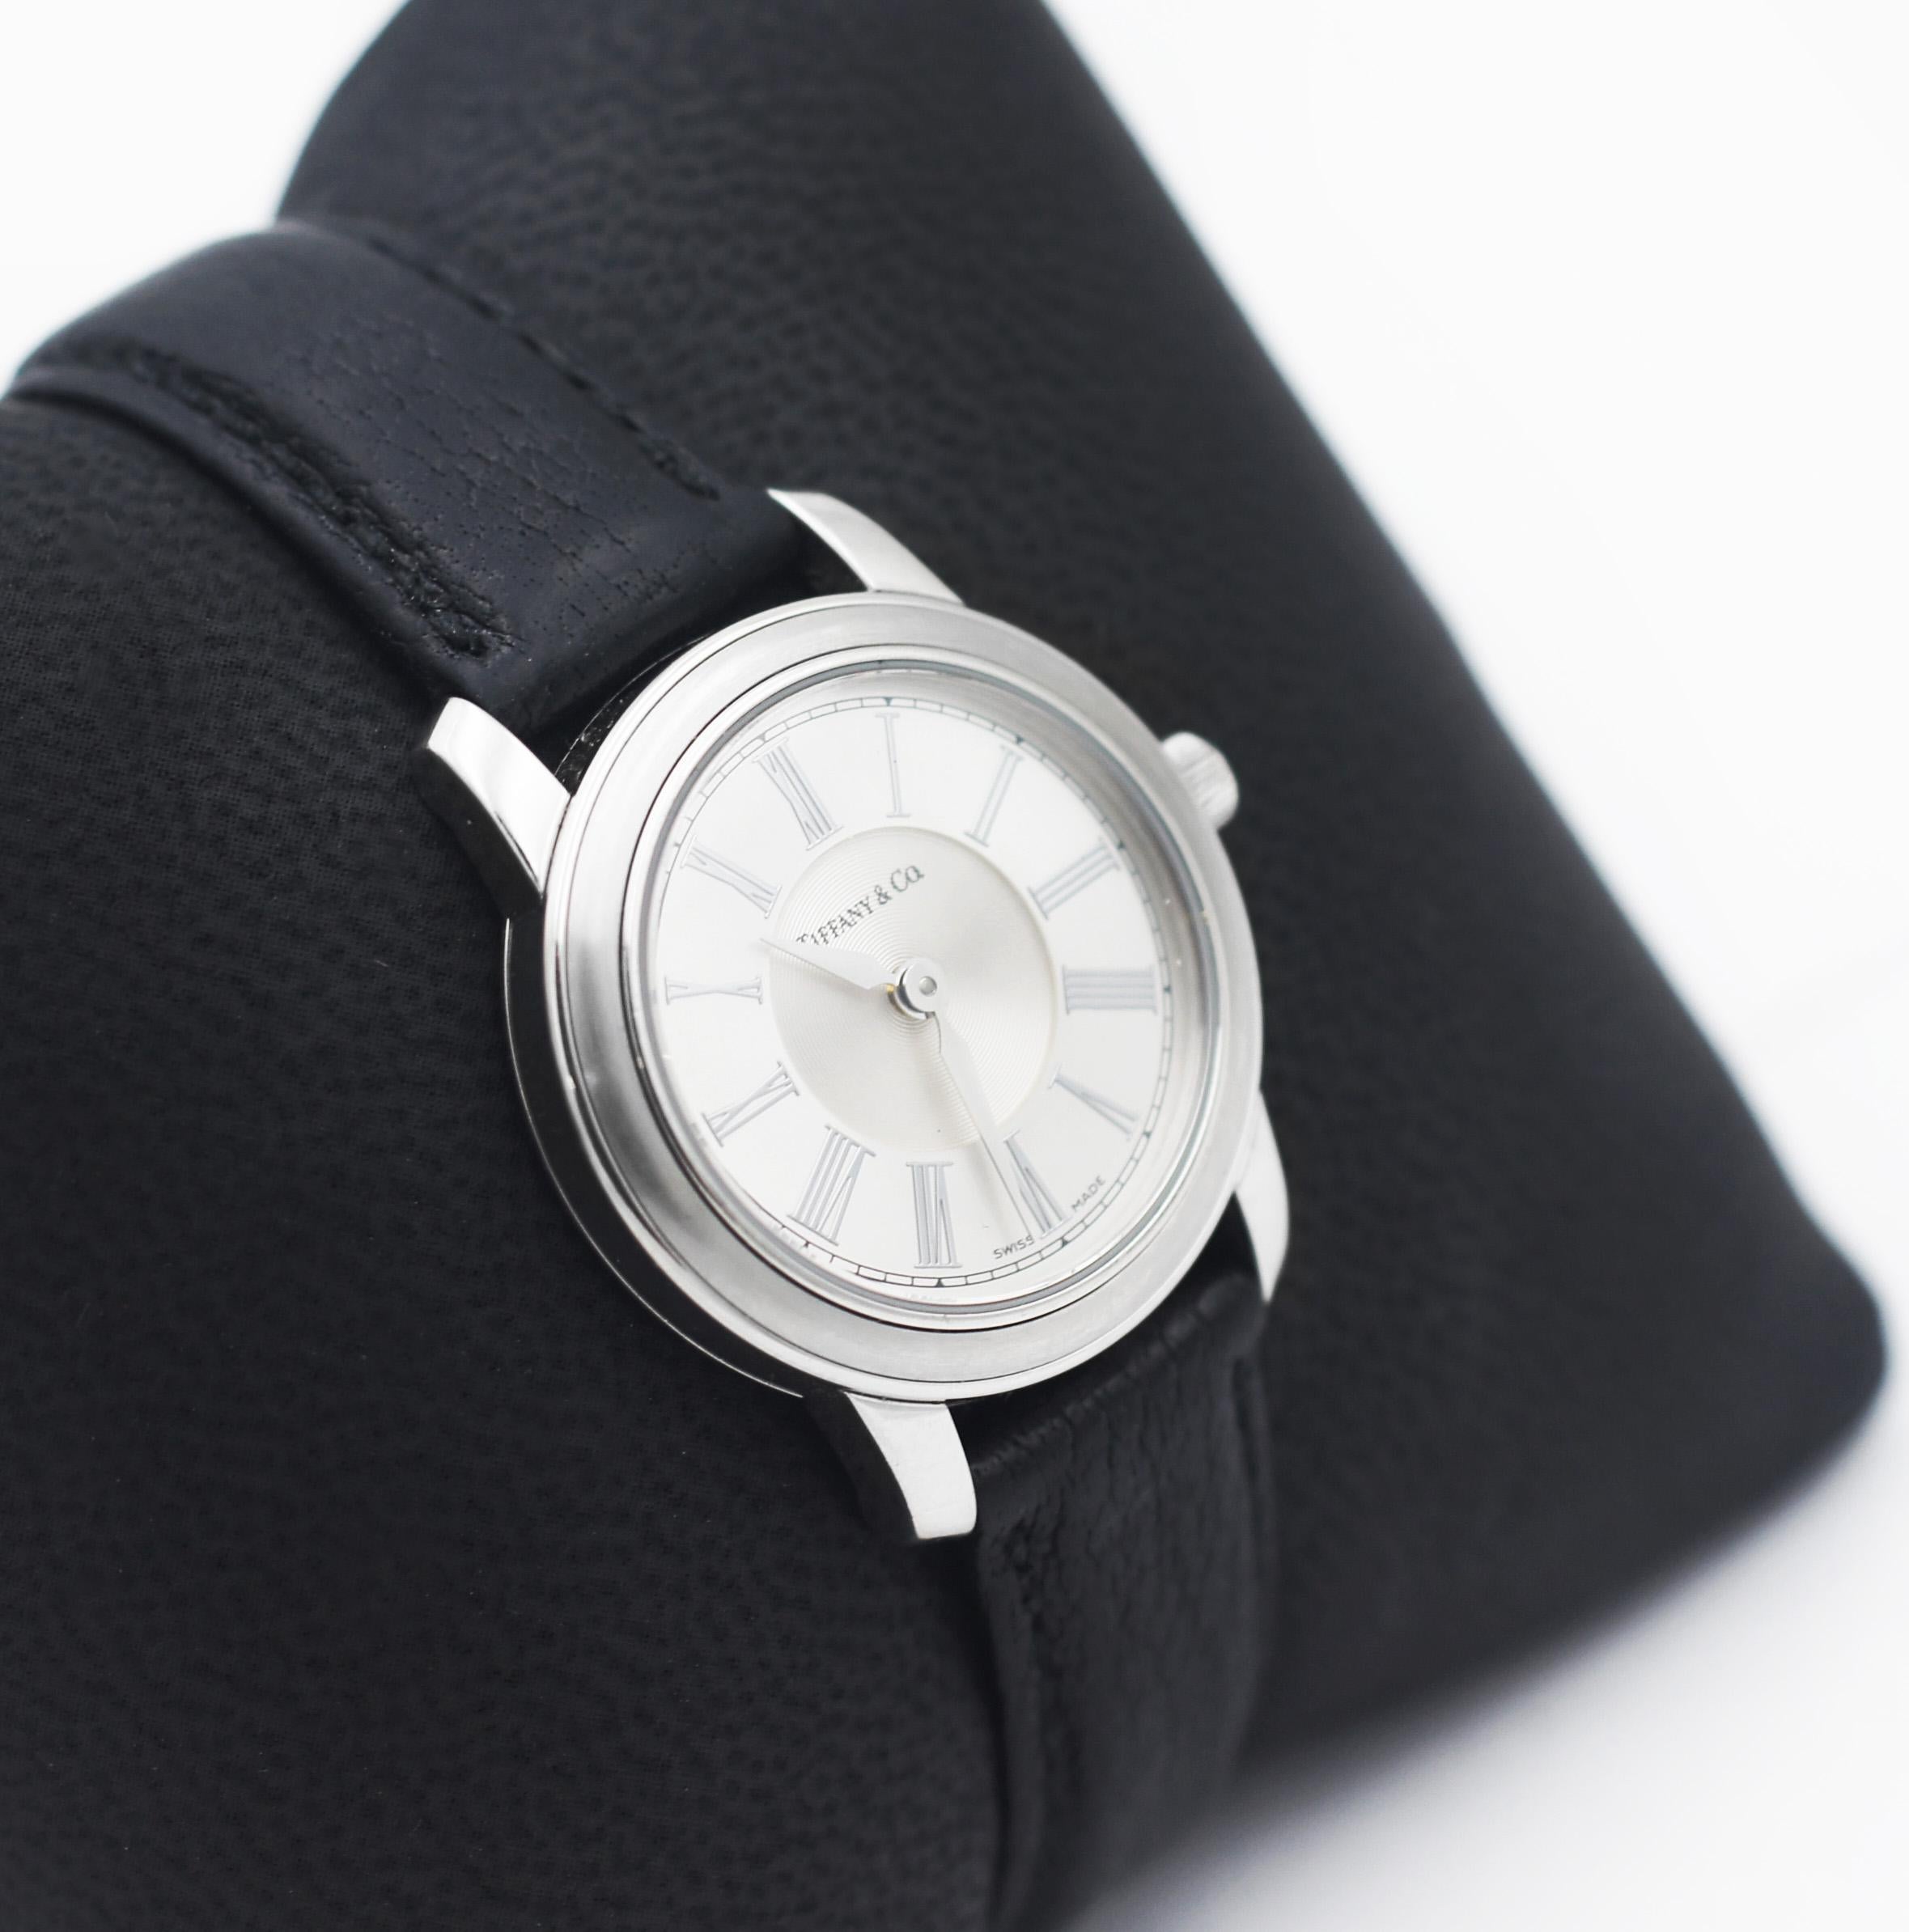 Tiffany & Co
Mark Resonator Atlas
Watch
27mm Case
Water Resistant
Stainless Steel case
Original Leather Strap
Box included
This beautiful pre-loved watch is in great looking and working condition.
Watch has light wear which is consistent with time